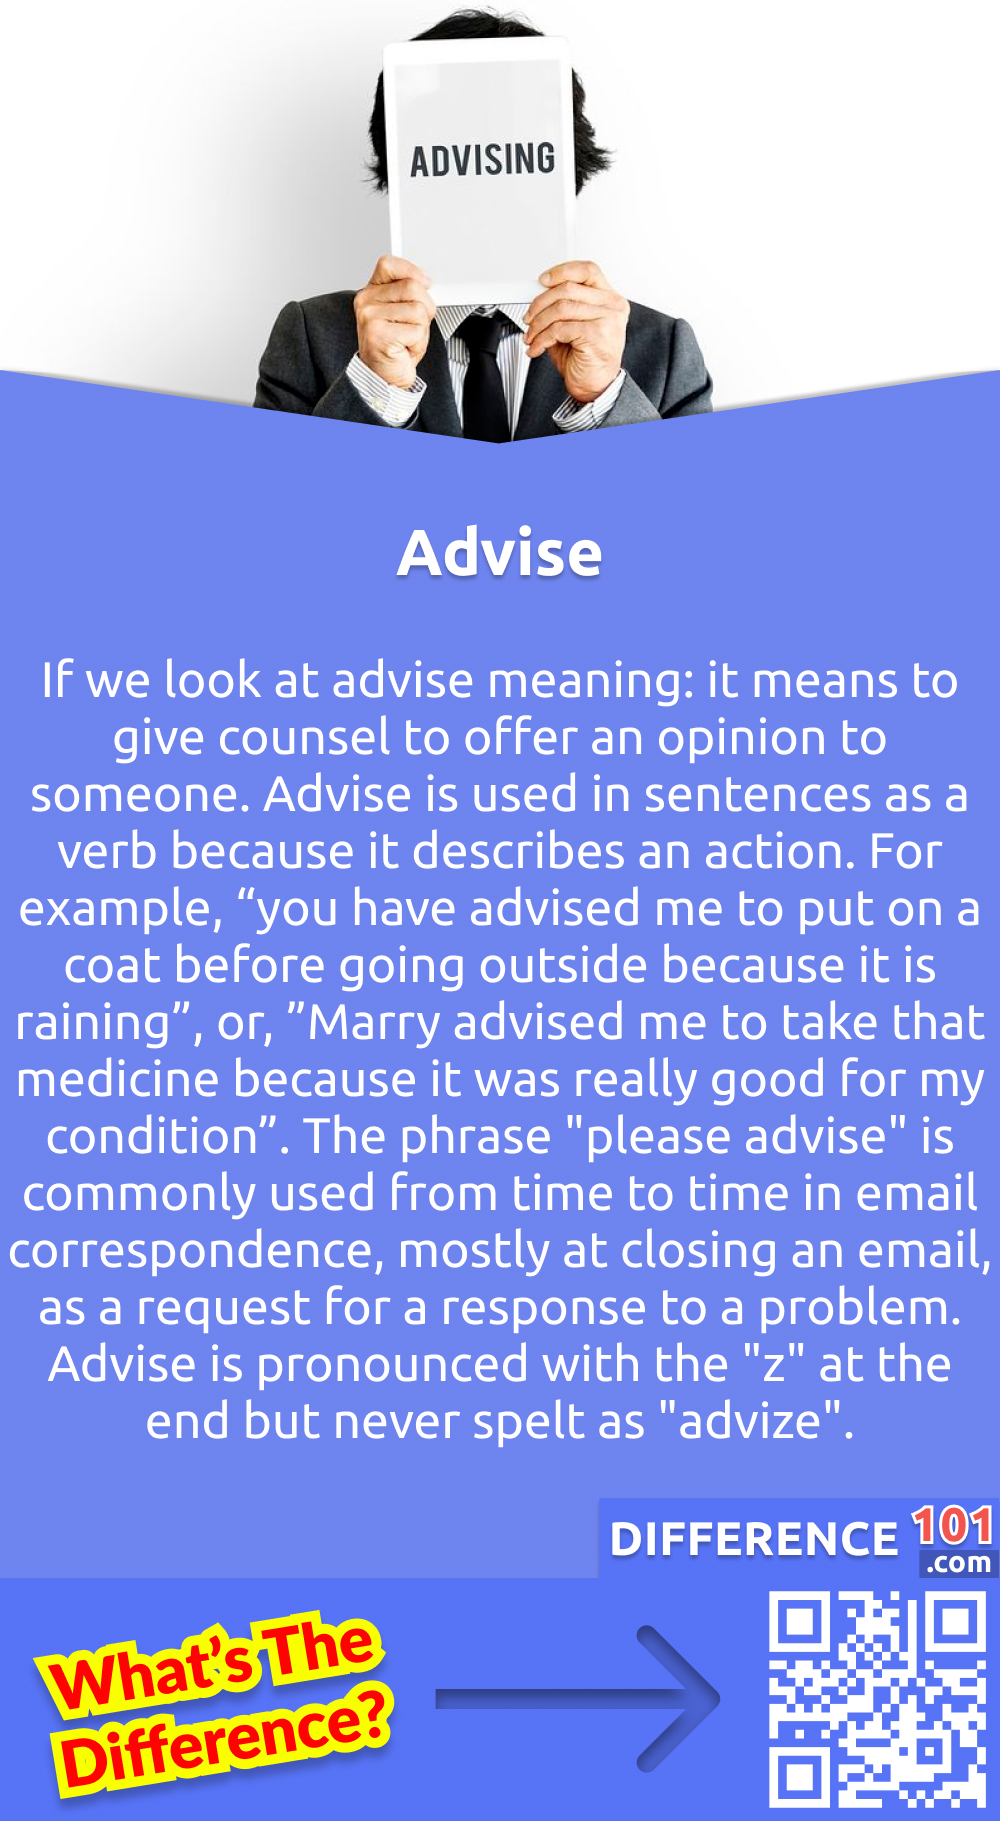 What Is Advise? If we look at advise meaning: it means to give counsel to offer an opinion to someone. Advise is used in sentences as a verb because it describes an action. For example, “you have advised me to put on a coat before going outside because it is raining”, or, ”Marry advised me to take that medicine because it was really good for my condition”. The phrase "please advise" is commonly used from time to time in email correspondence, mostly at closing an email, as a request for a response to a problem. Advise is pronounced with the "z" at the end but never spelt as "advize".  